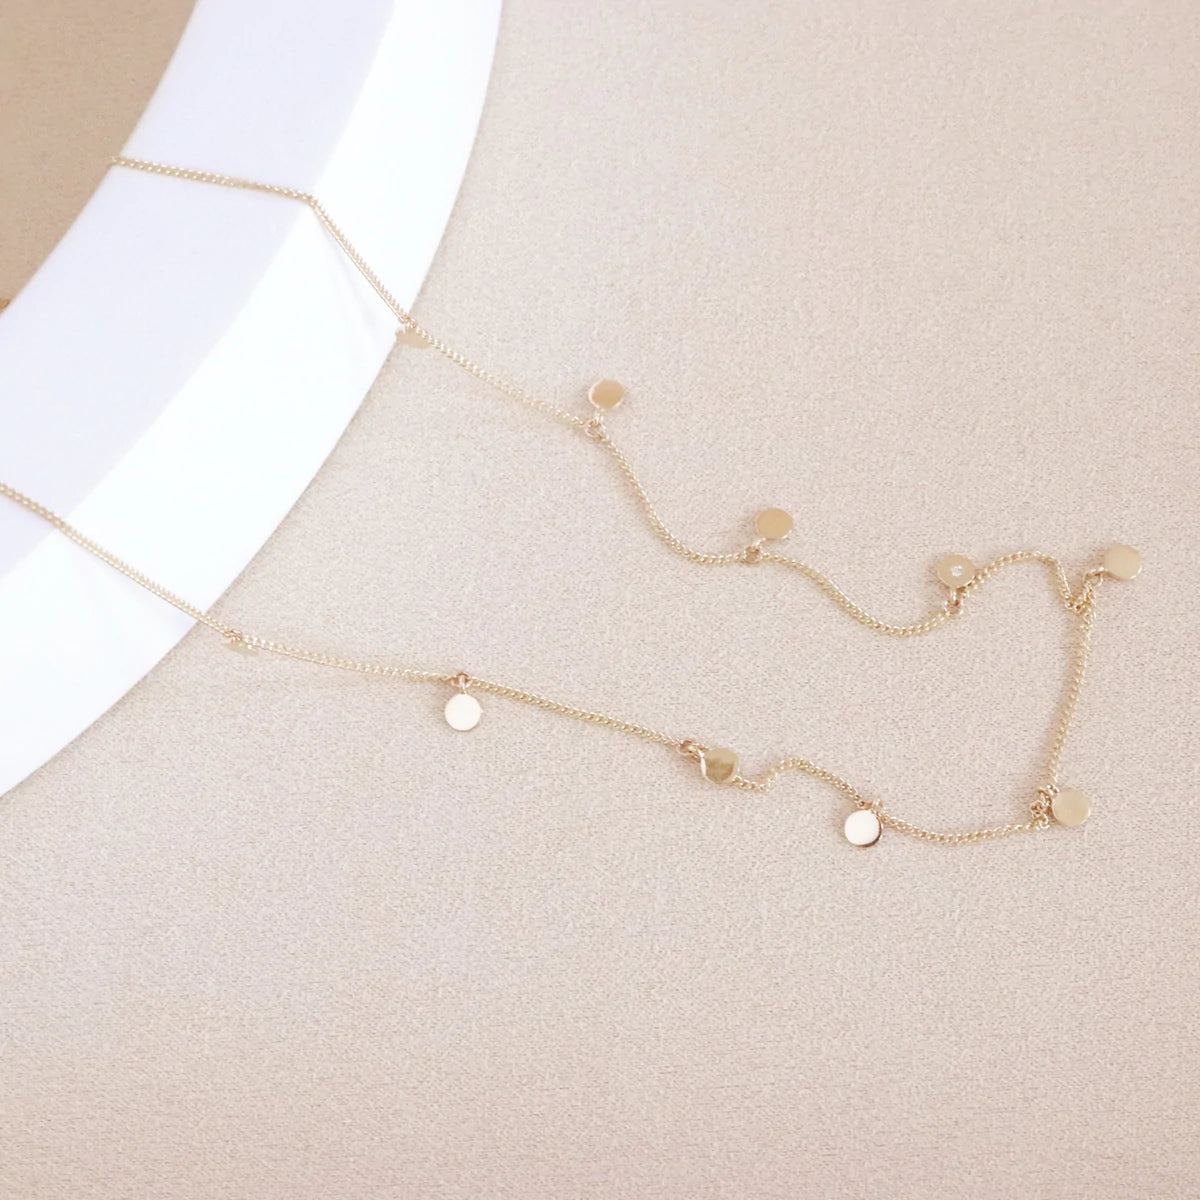 DAINTY POISE DISK NECKLACE - CUBIC ZIRCONIA &amp; GOLD - SO PRETTY CARA COTTER